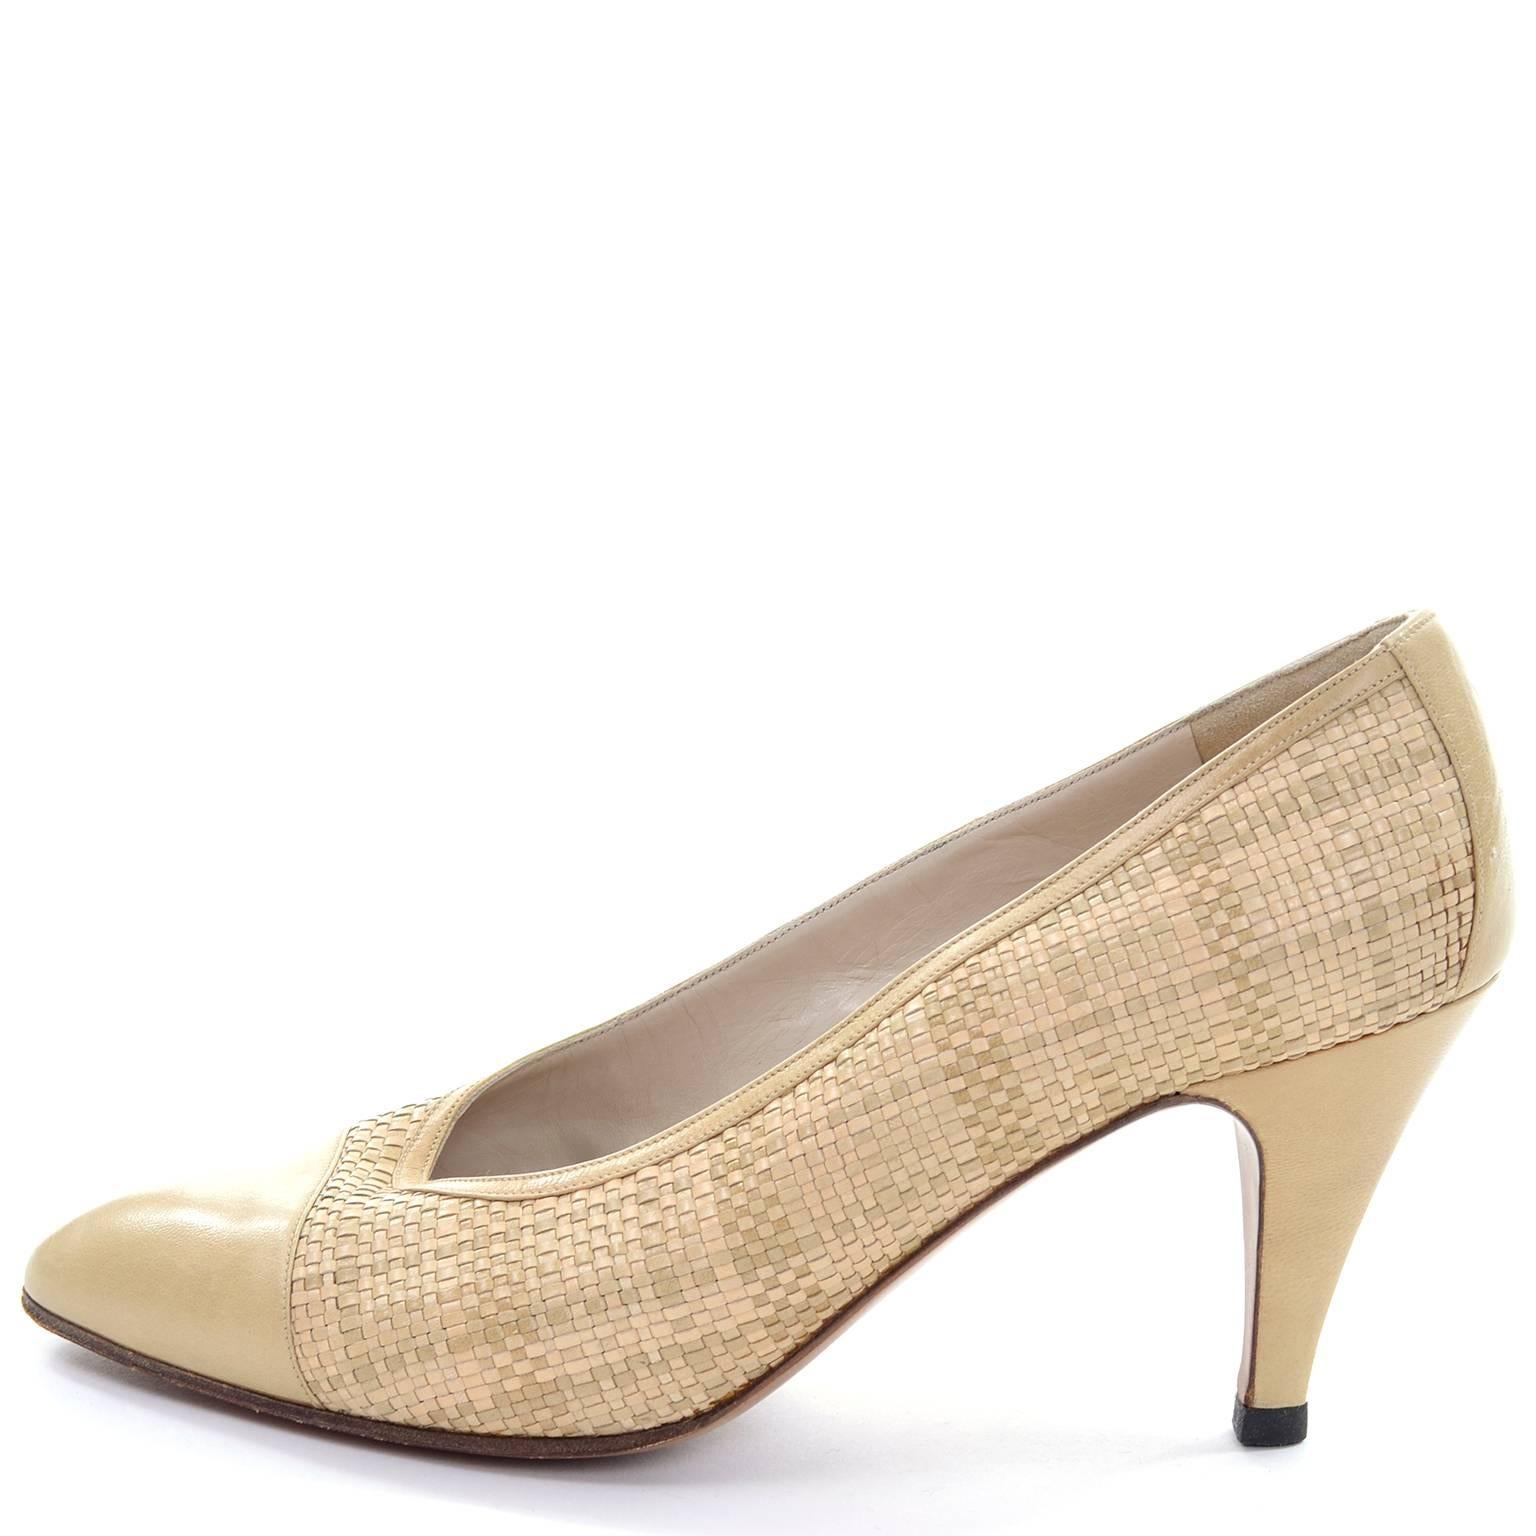 Beige Chanel Vintage Pumps Woven Shoes With Tan Leather Trim in Size 8.5 For Sale